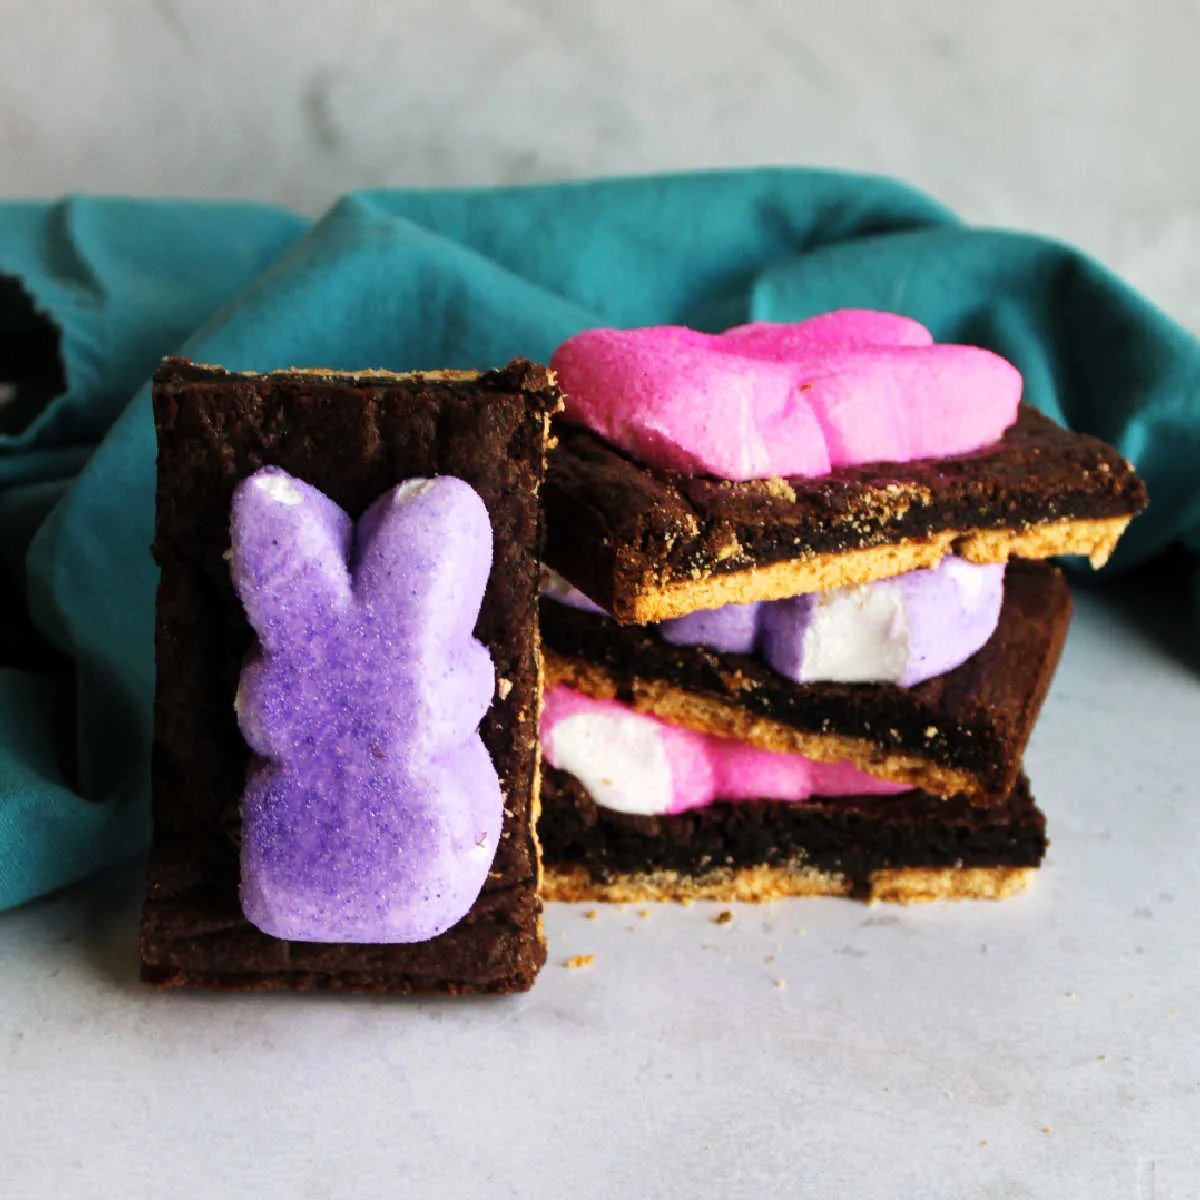 Stack of Peeps smores bars showing graham cracker base, gooey brownie-like chocolate layer and melted bunny shaped peeps on top.